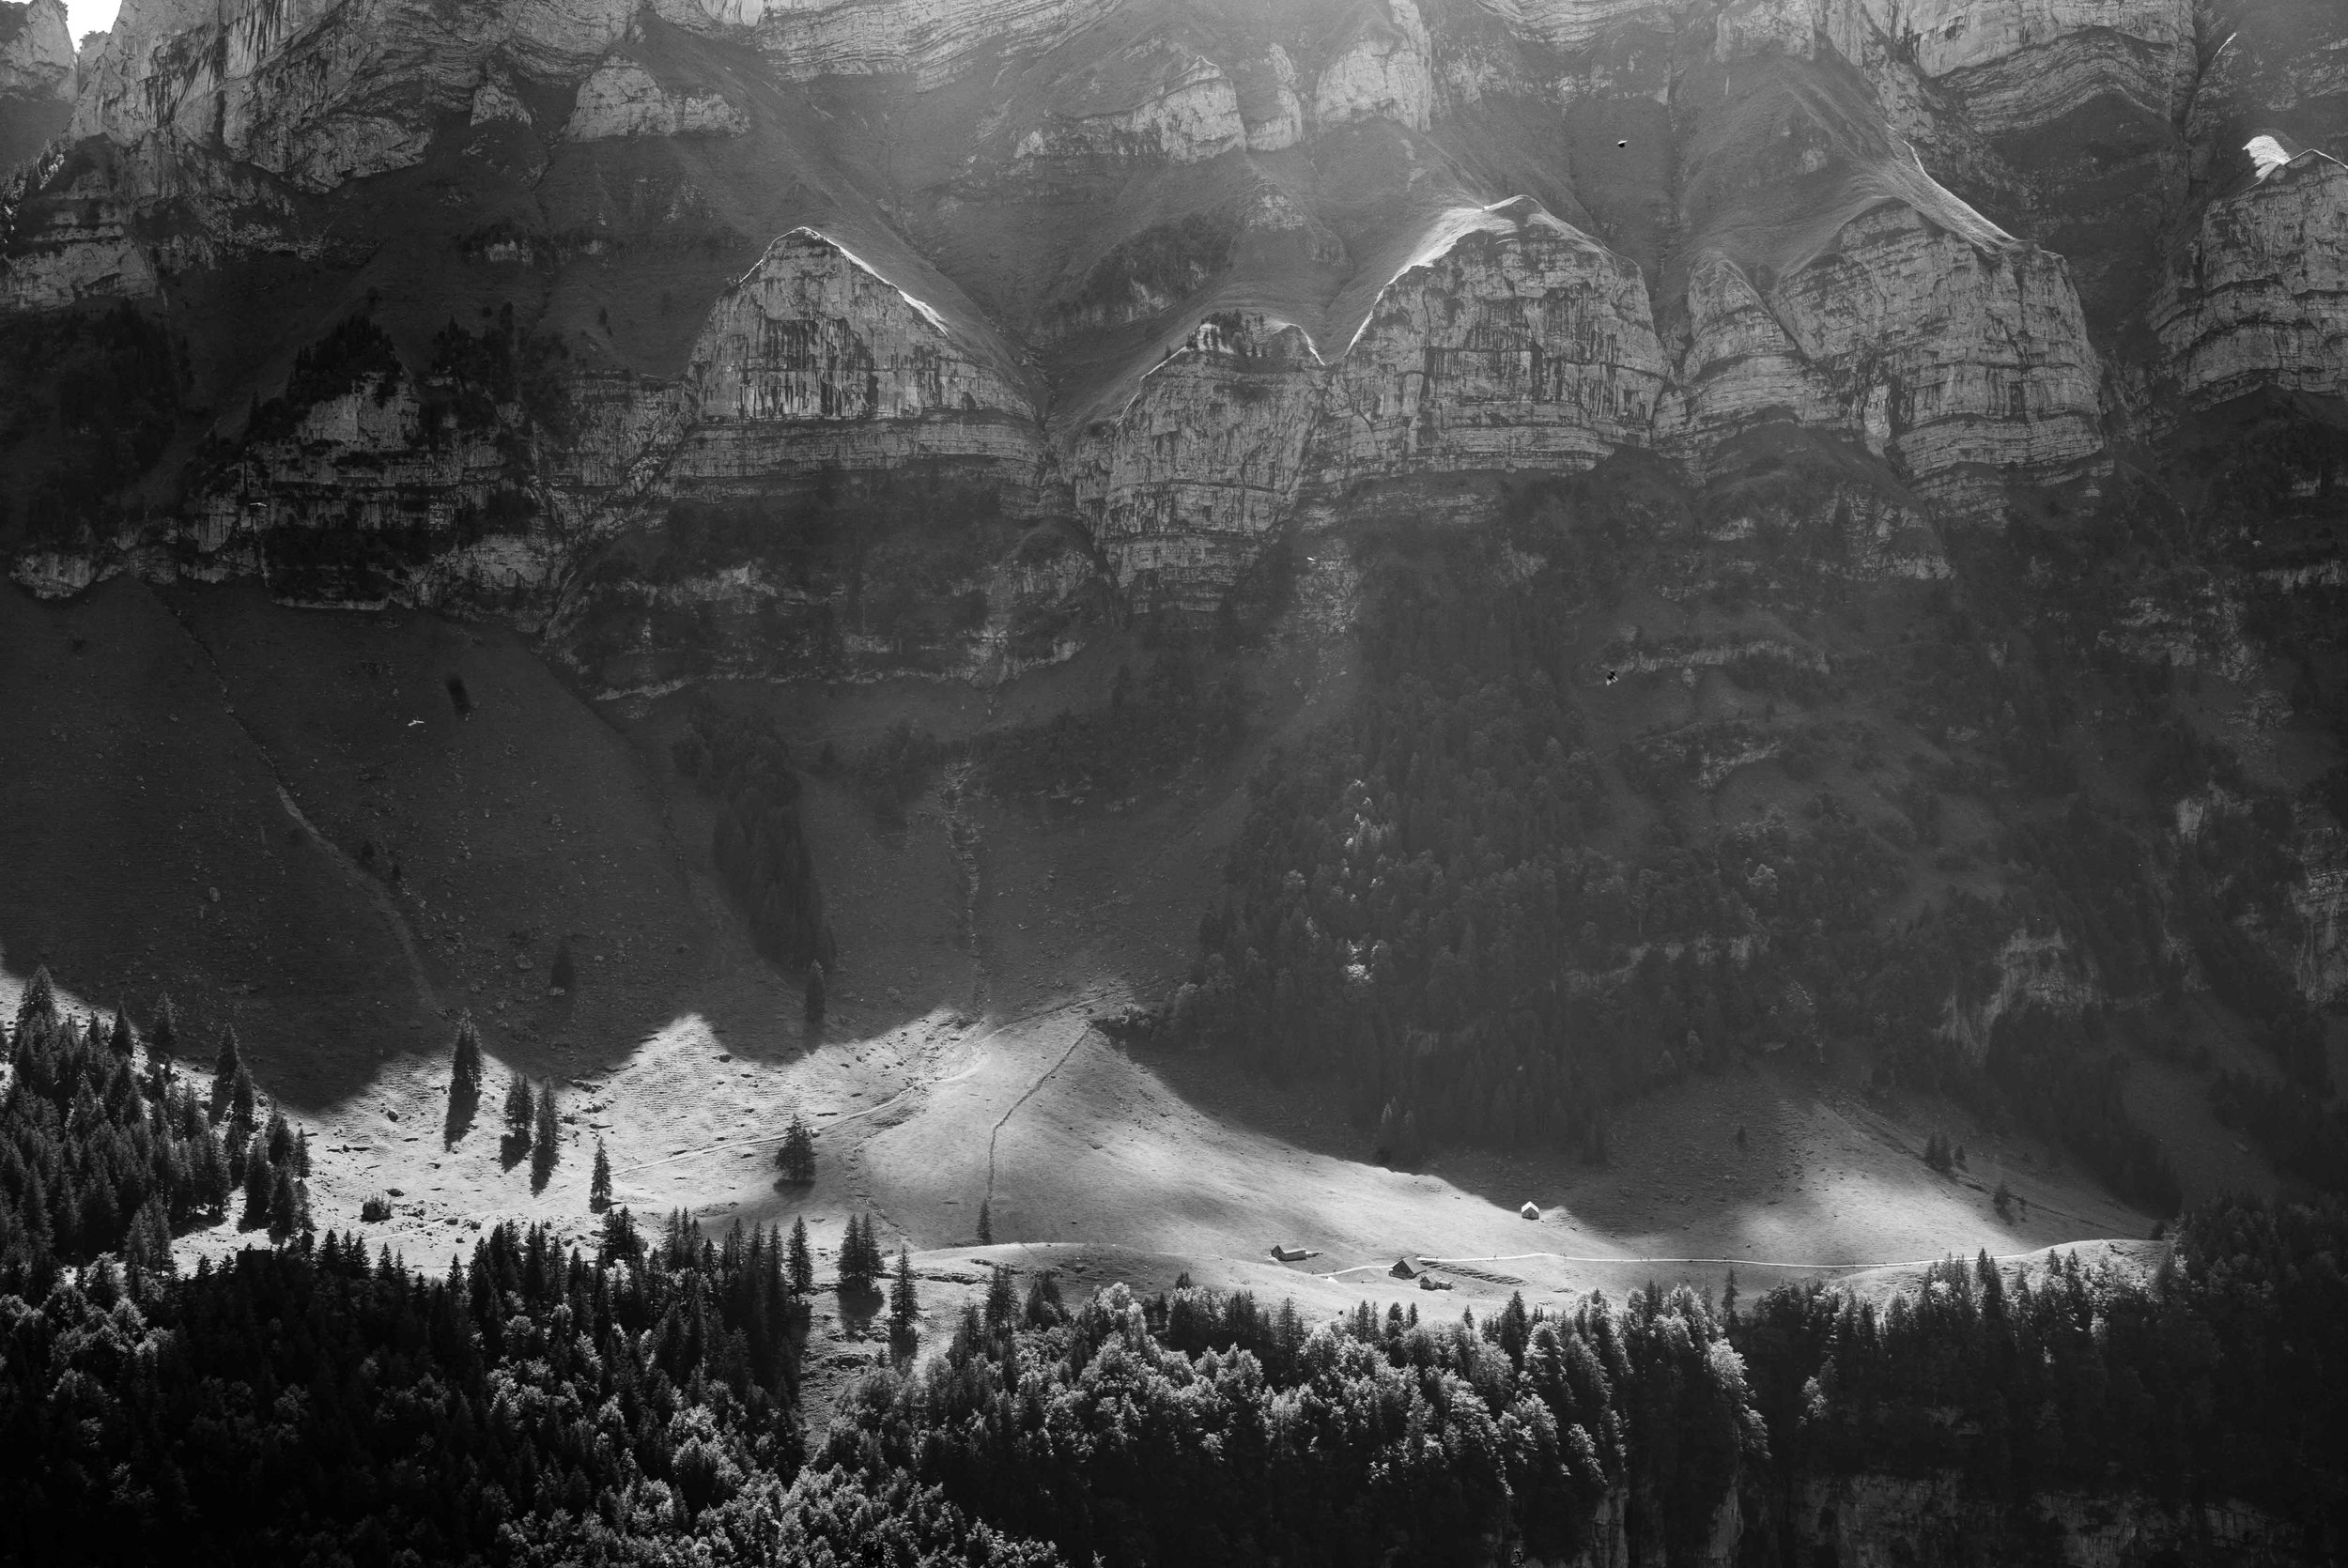   Midday light in the valley    Leica Monochrom 1/125s F16 ISO650  